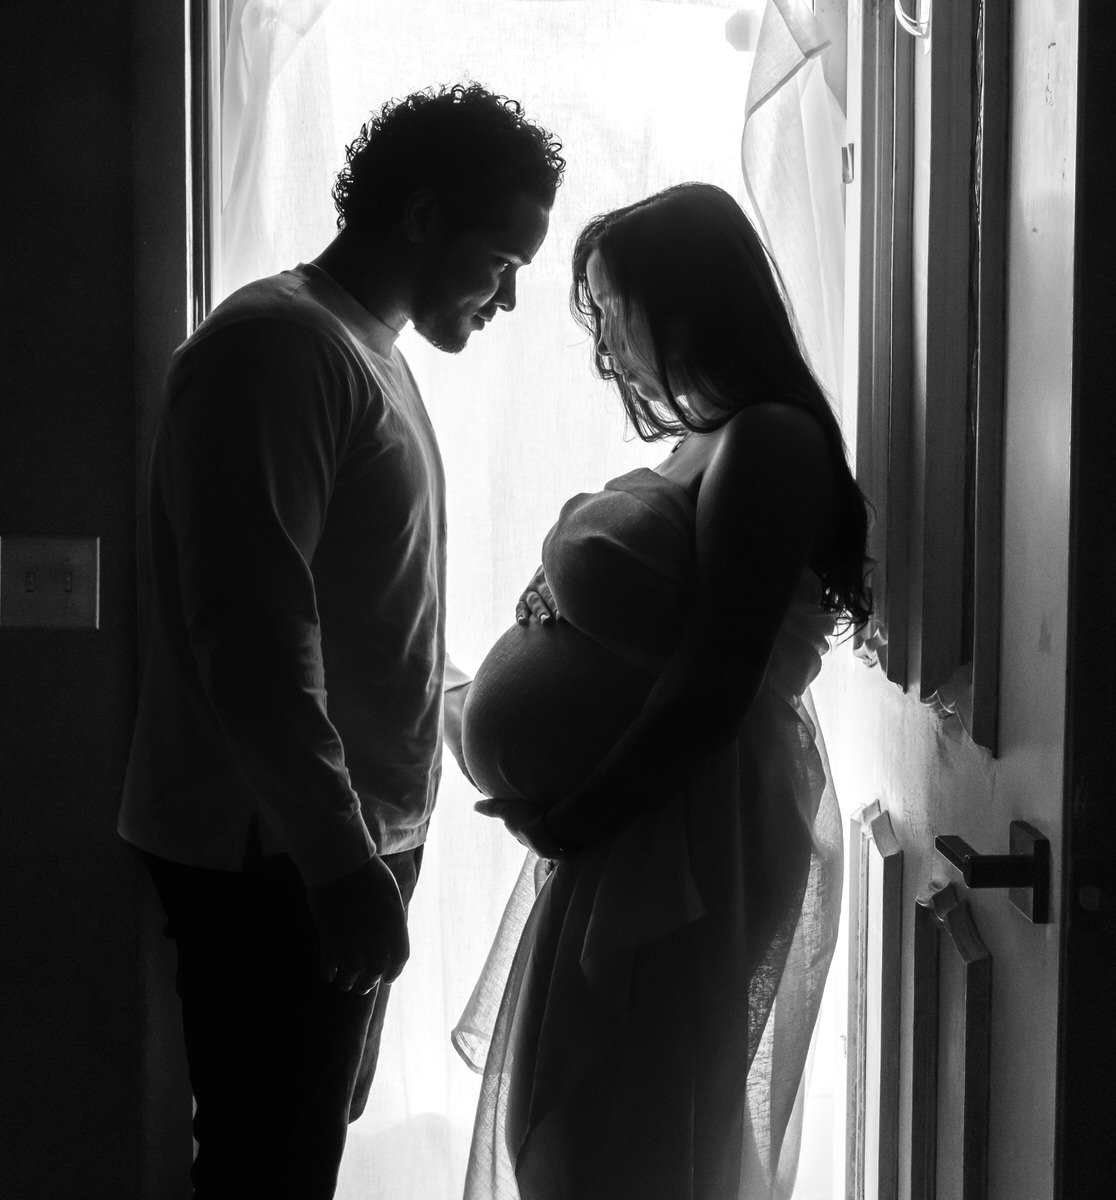 A silhouette of a couple standing face-to-face near a window, with the pregnant woman holding her belly and the man gently touching her showing what to wear for maternity photos